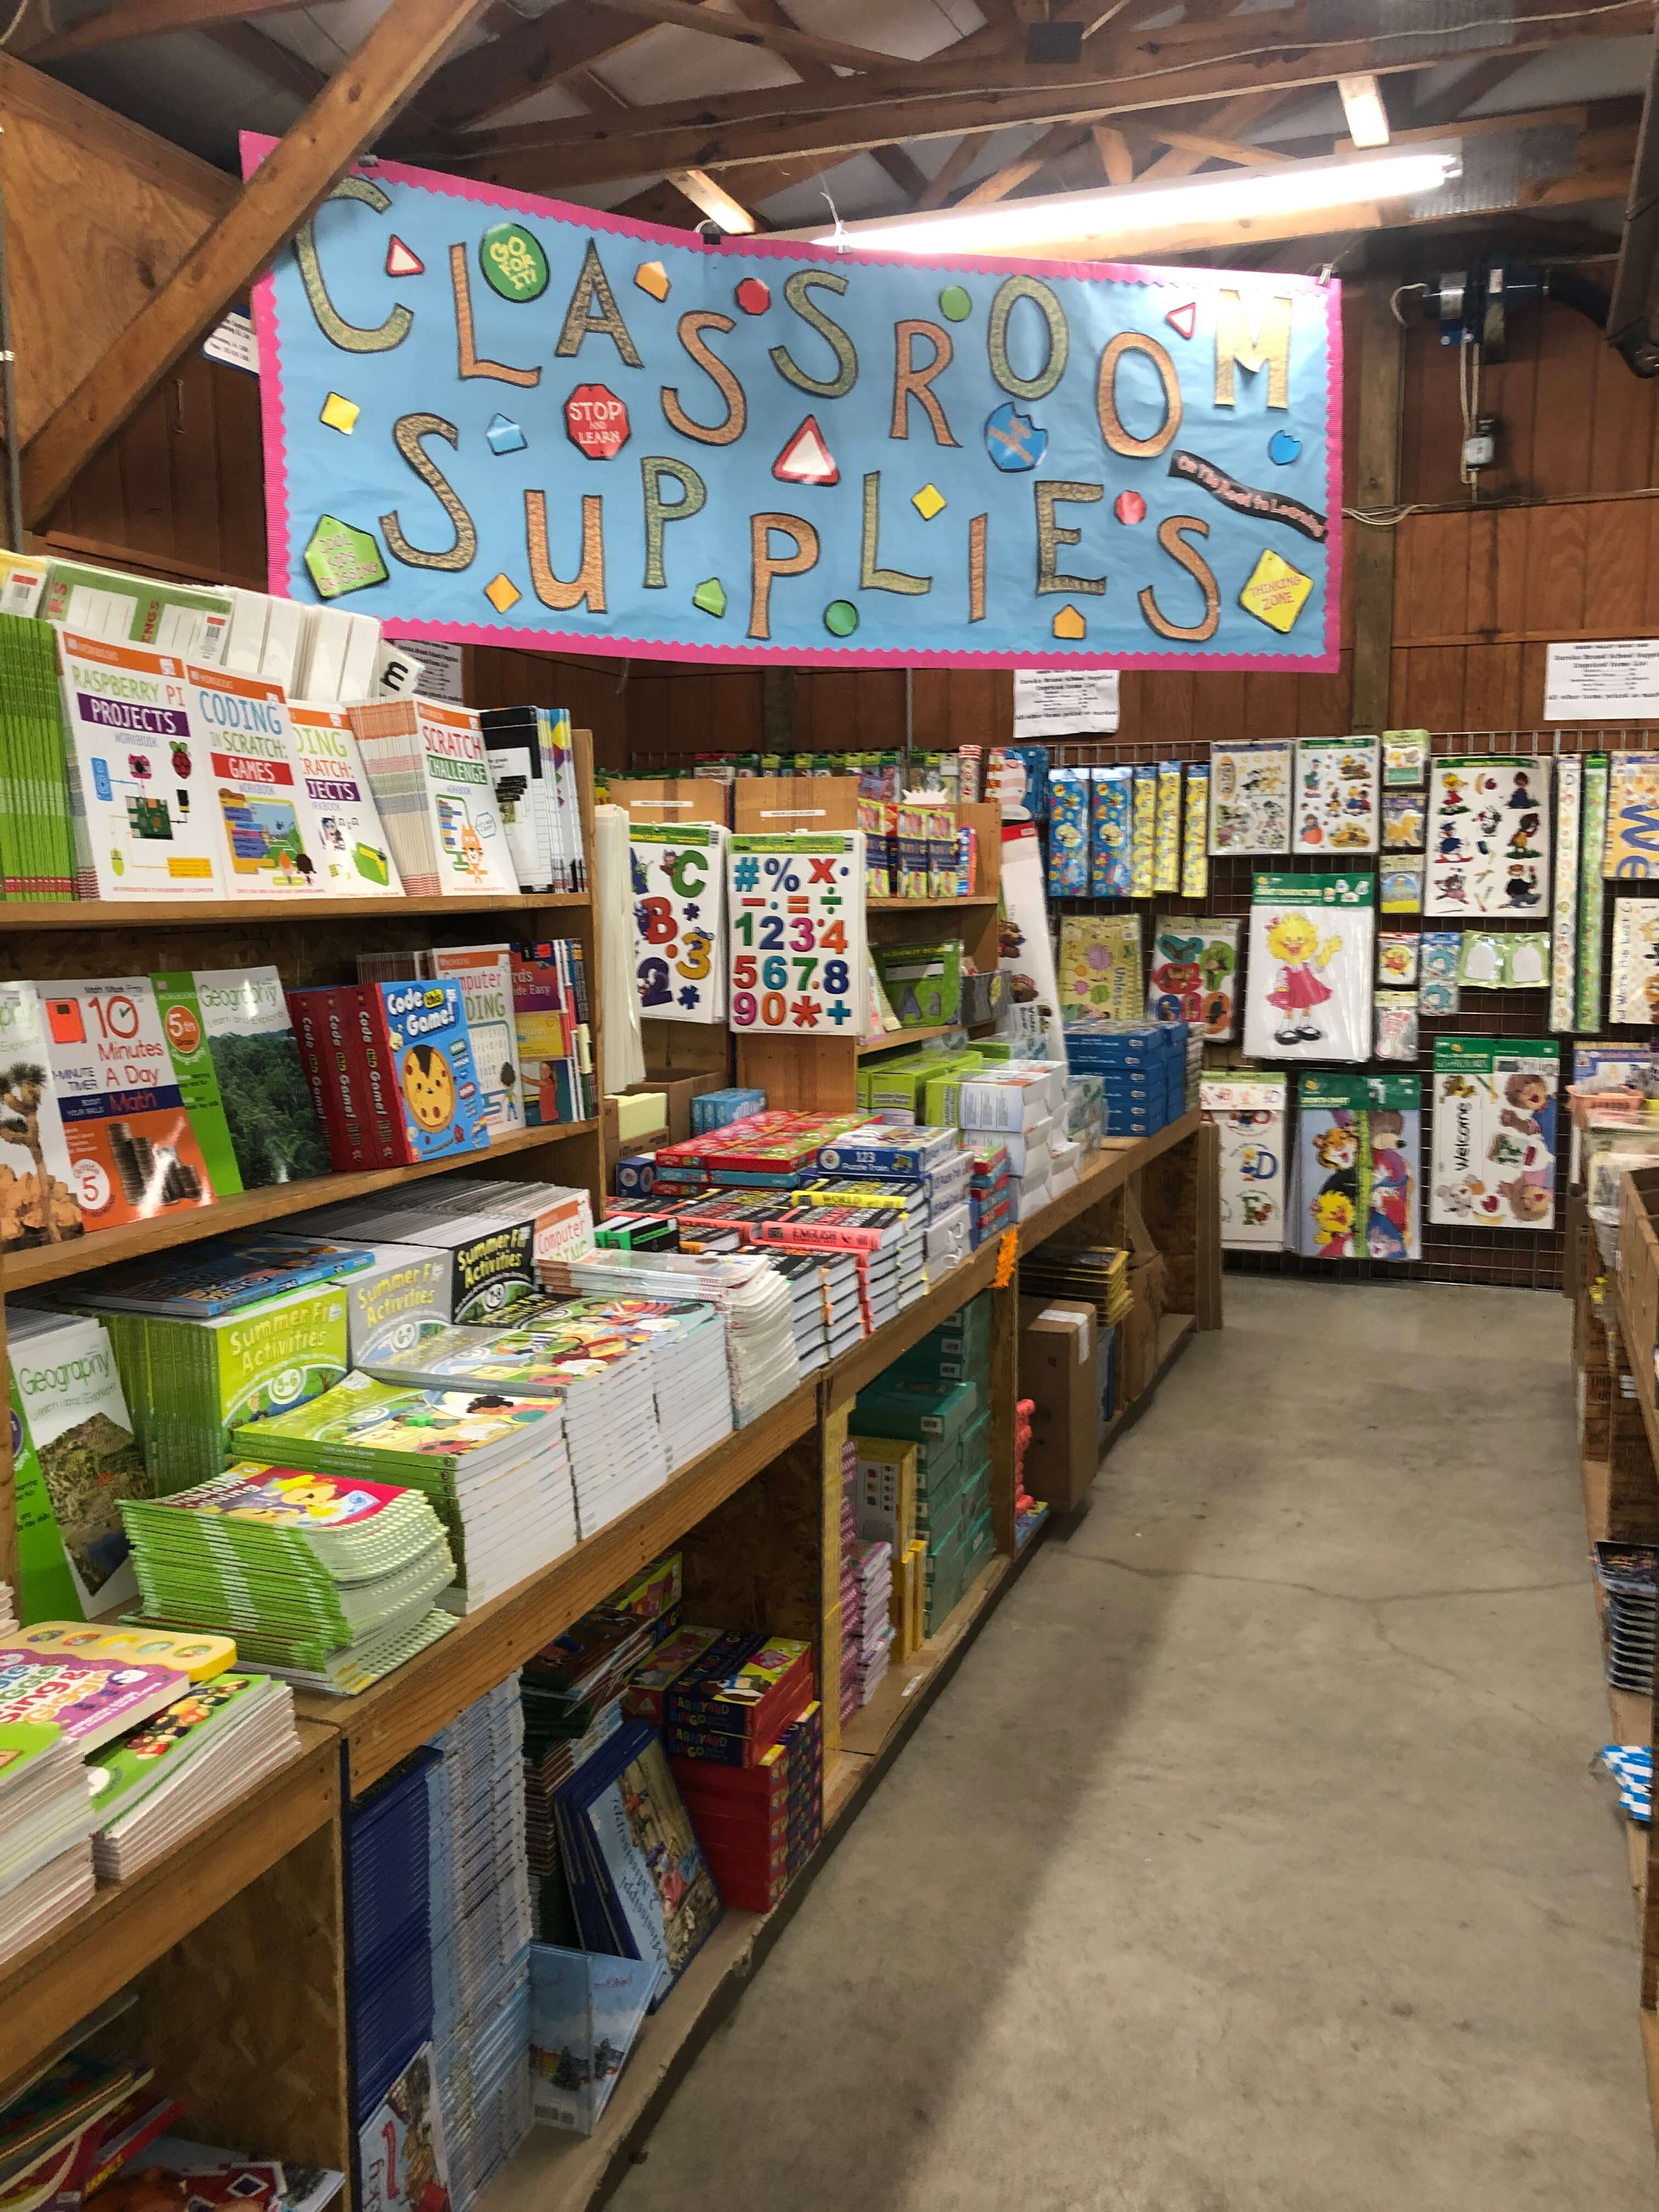 Books, manipulatives, stickers, and bulletin board accessories line the shelves. A large banner overhead reads CLASSROOM SUPPLIES.